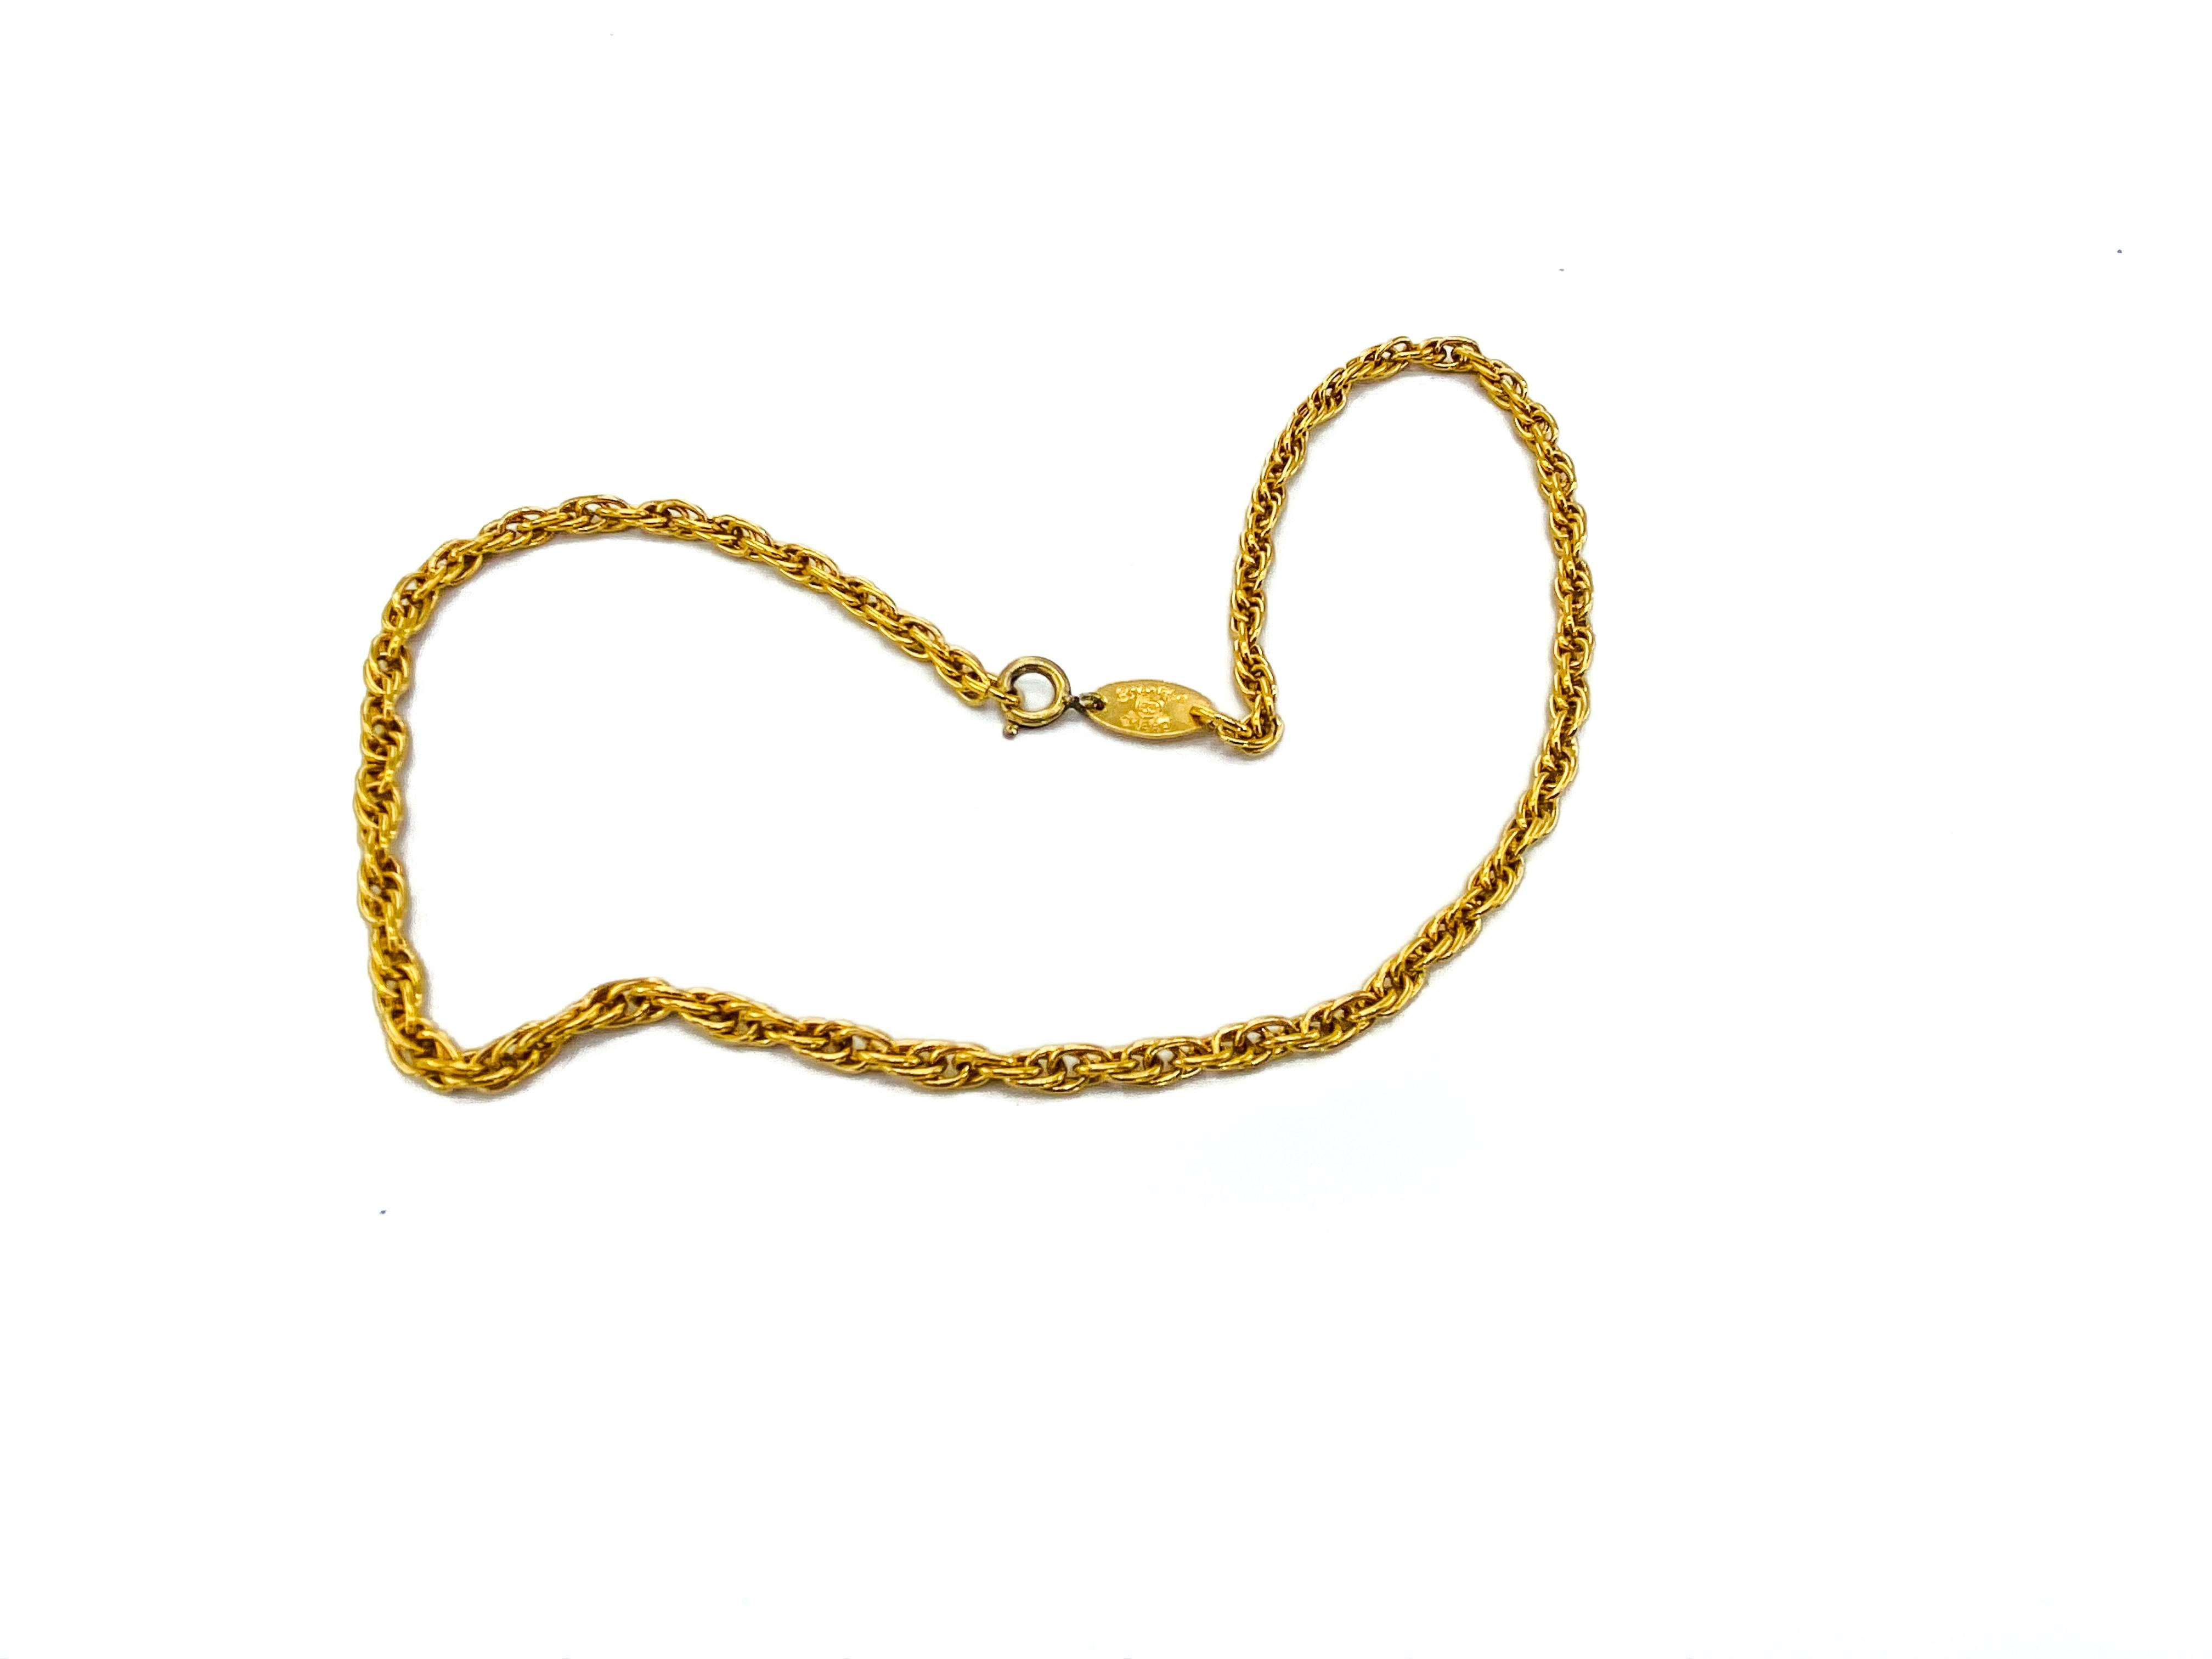 Chanel Necklace Vintage 1980s Chain Choker

The ultimate go-anywhere goes with everything gold plated chain from the most desirable fashion house in the world.

Detail
-Made in 1983
-Cast from gold plated metal
-Rope chain style
-Spring ring